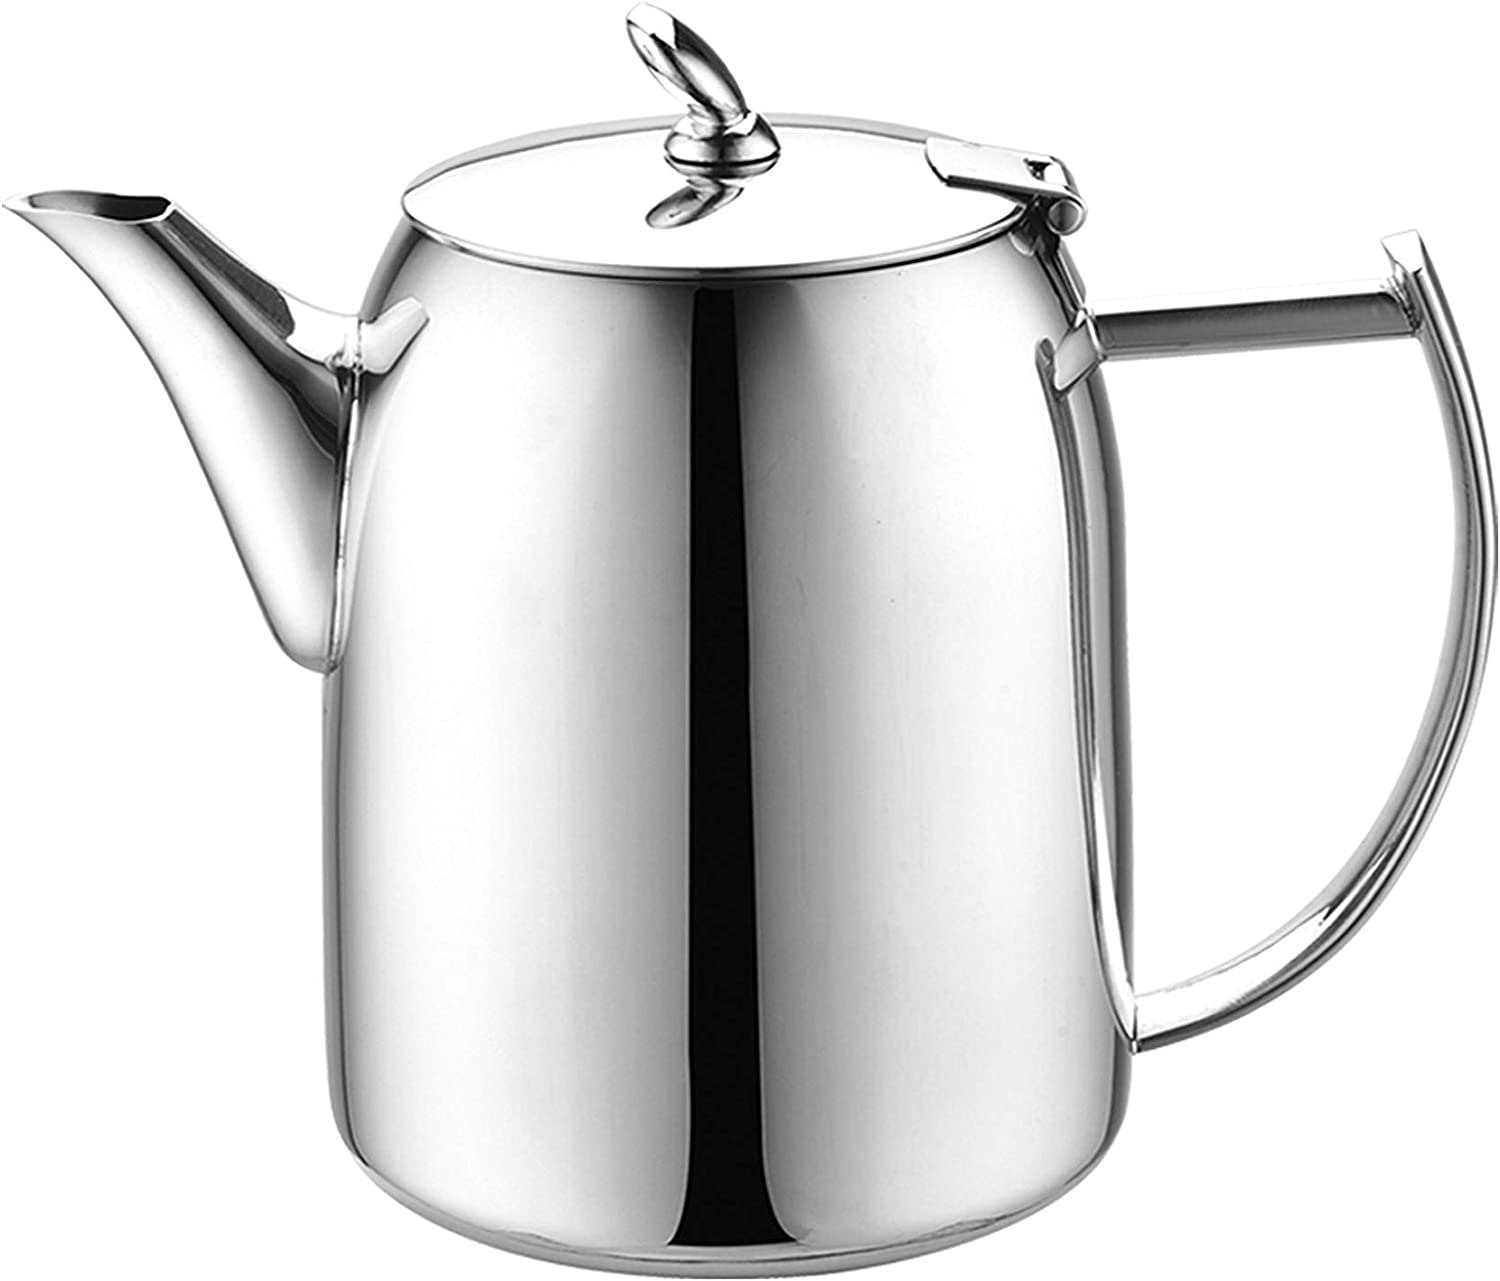 Cafe Ole Café Olé CHC-012 Chatsworth Coffee Pot with Unique Lid Made of High Quality 18/10 Stainless Steel - High Gloss Polish, 12oz, 0.35L, Drip Free Casting, Stainless Steel